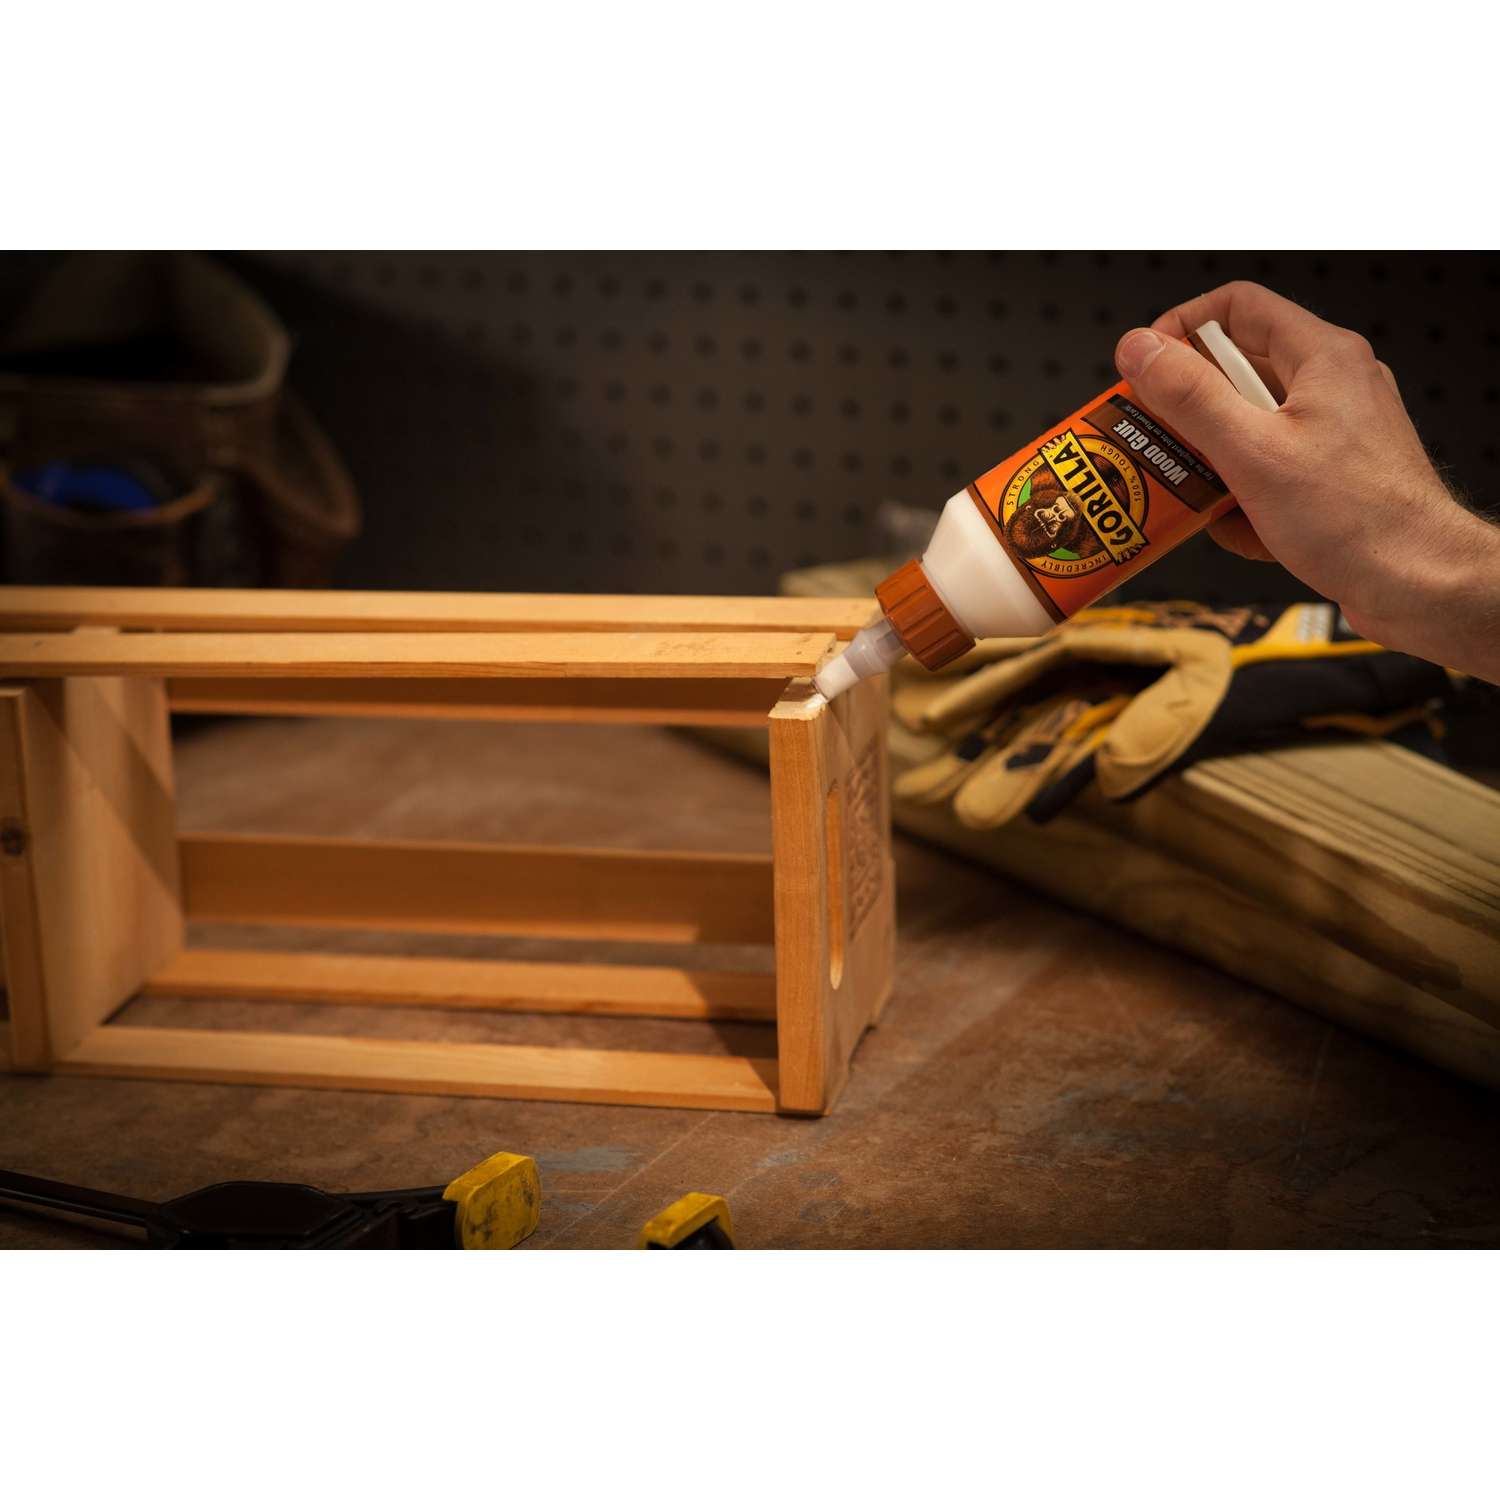 Looking for suggestion on wood glue roller. : r/woodworking